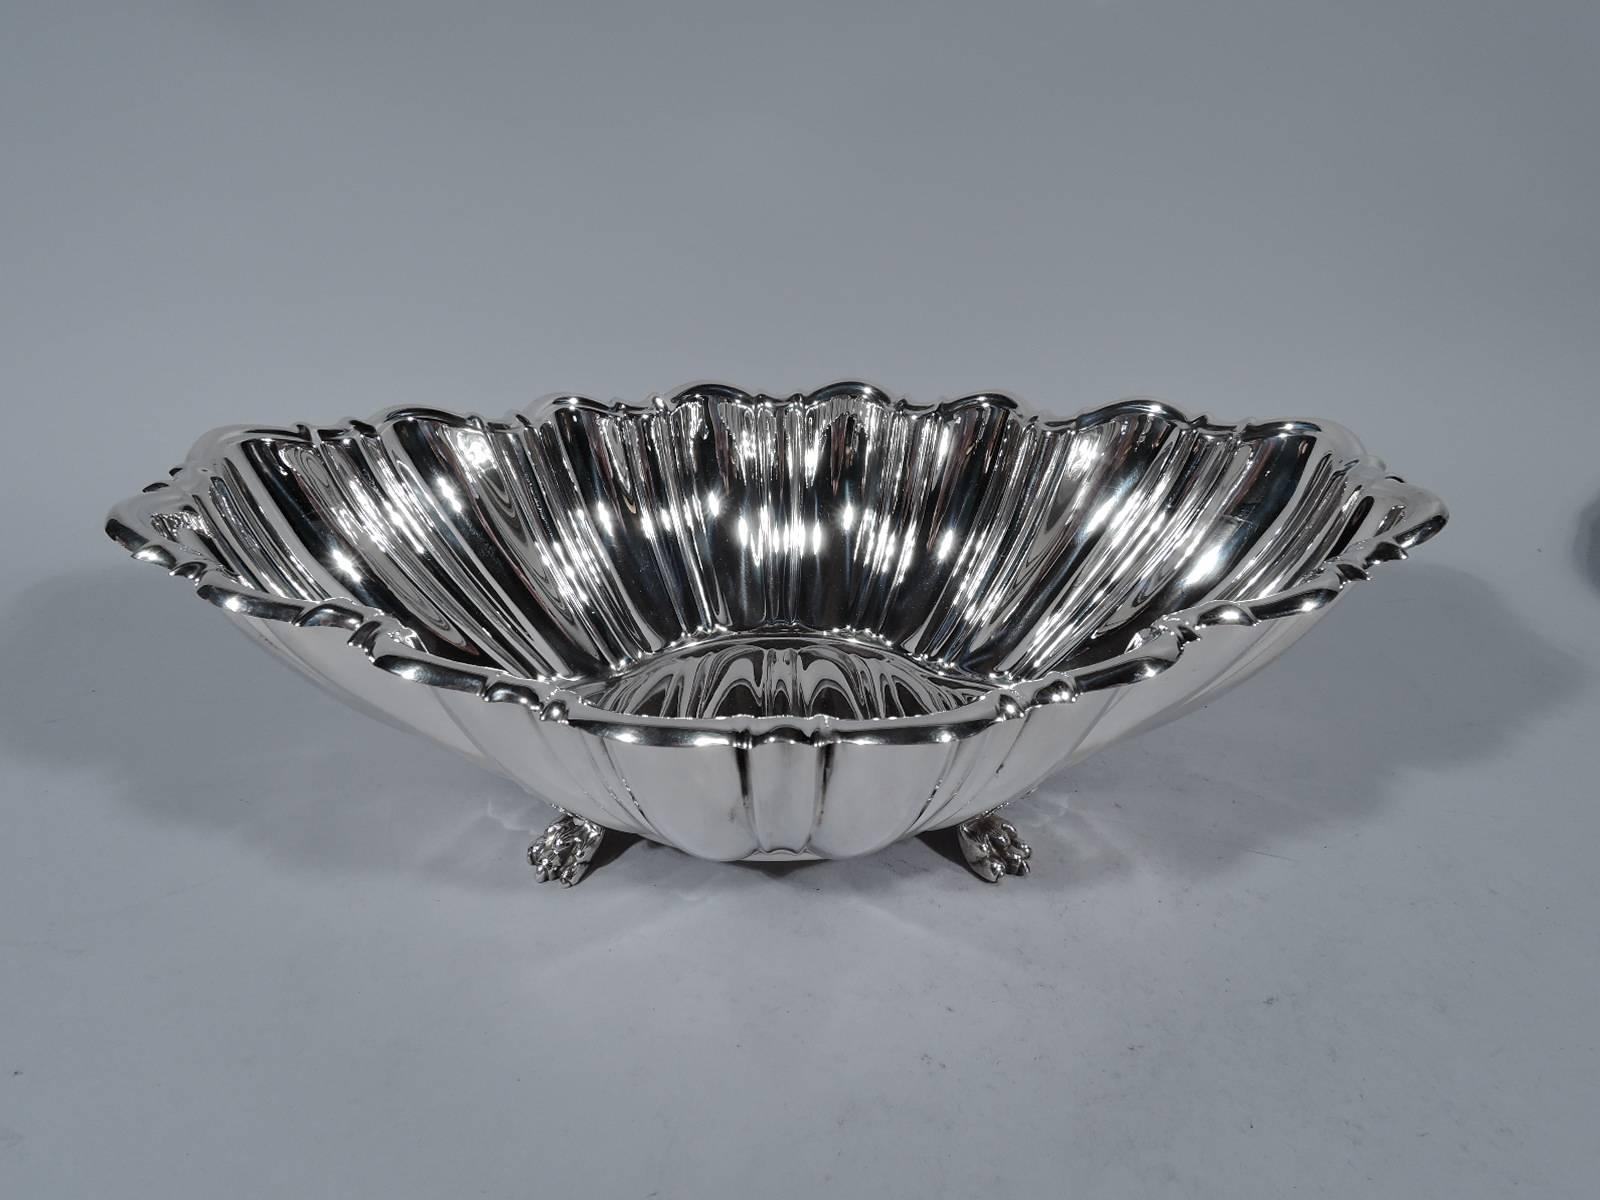 Modern classical sterling silver centerpiece bowl. Made by Reed & Barton in Taunton, Mass. in 1954. Quatrefoil well. Curved sides with alternating flutes and lobes. Scrolled rim. Rests on four paw supports with palmette mounts. A great revving up of